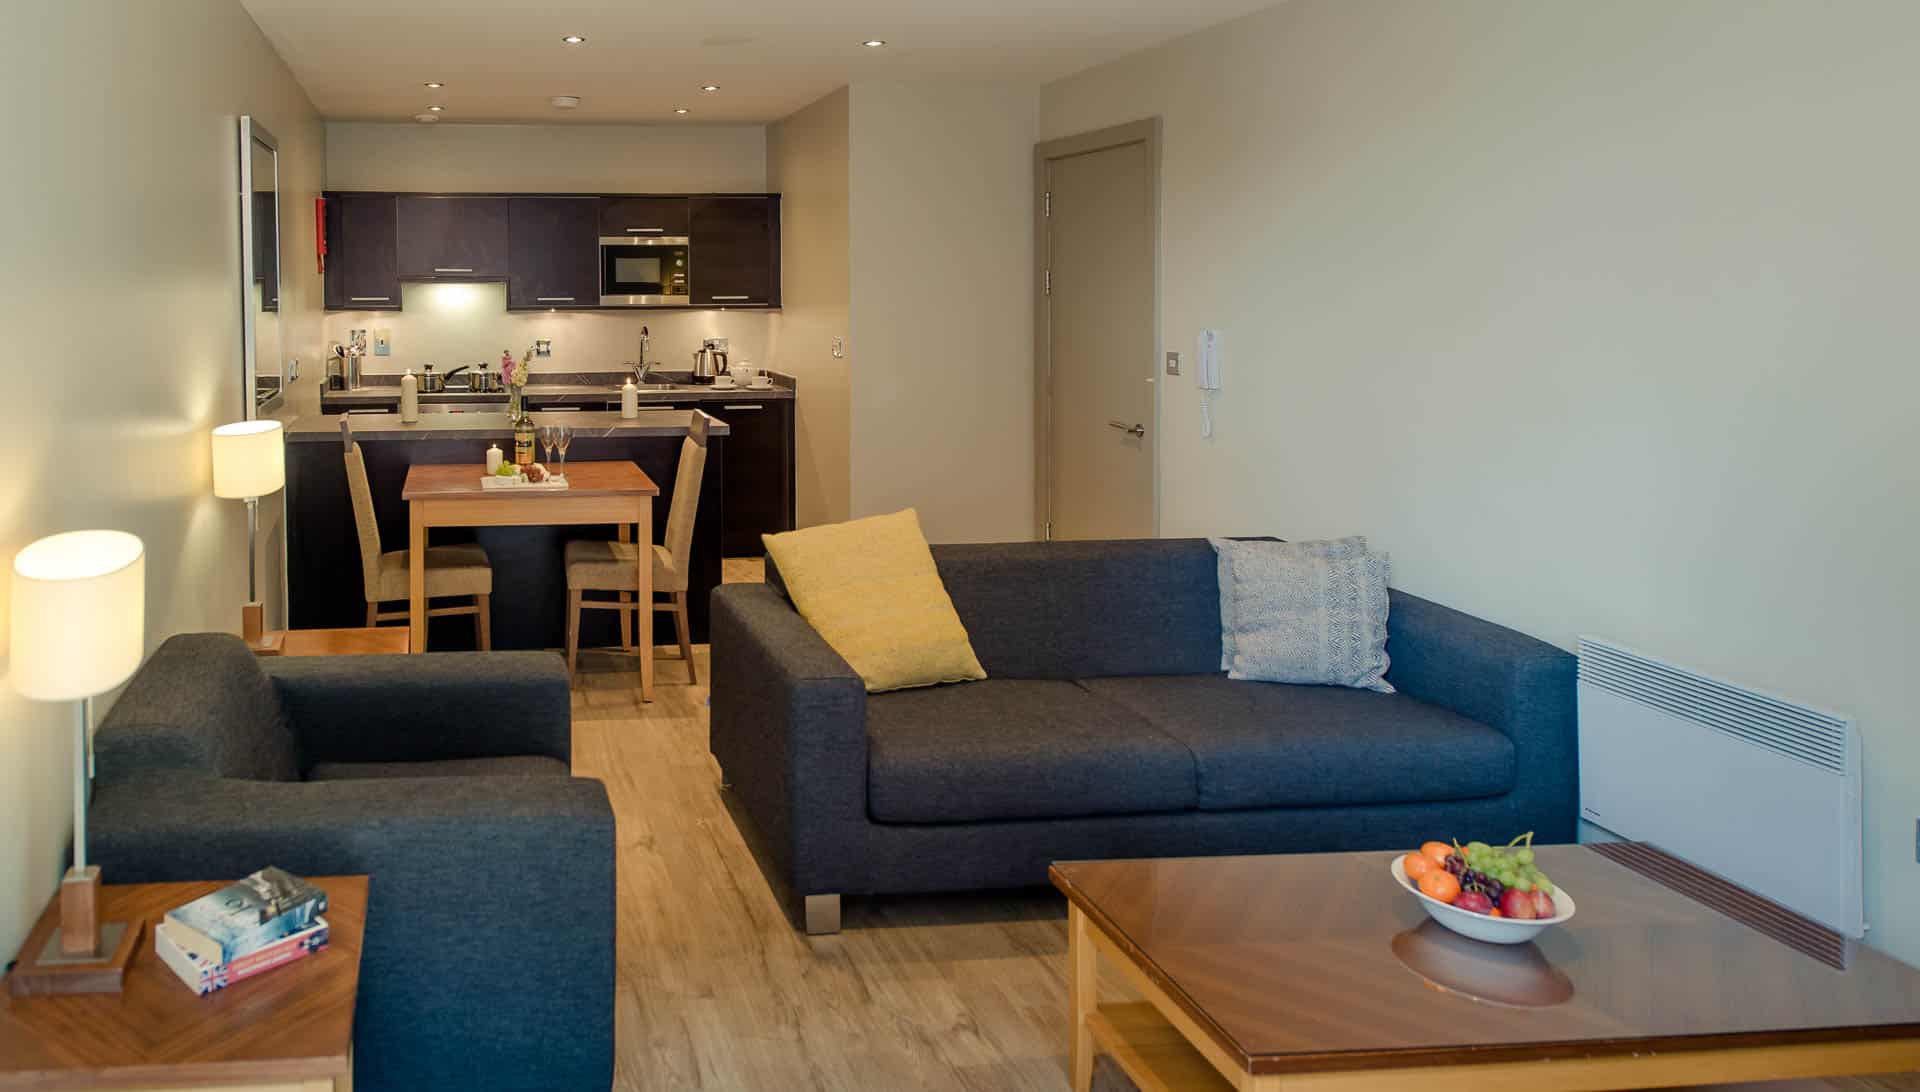 PREMIER SUITES Manchester living, dining and kitchen area of one bedroom apartment